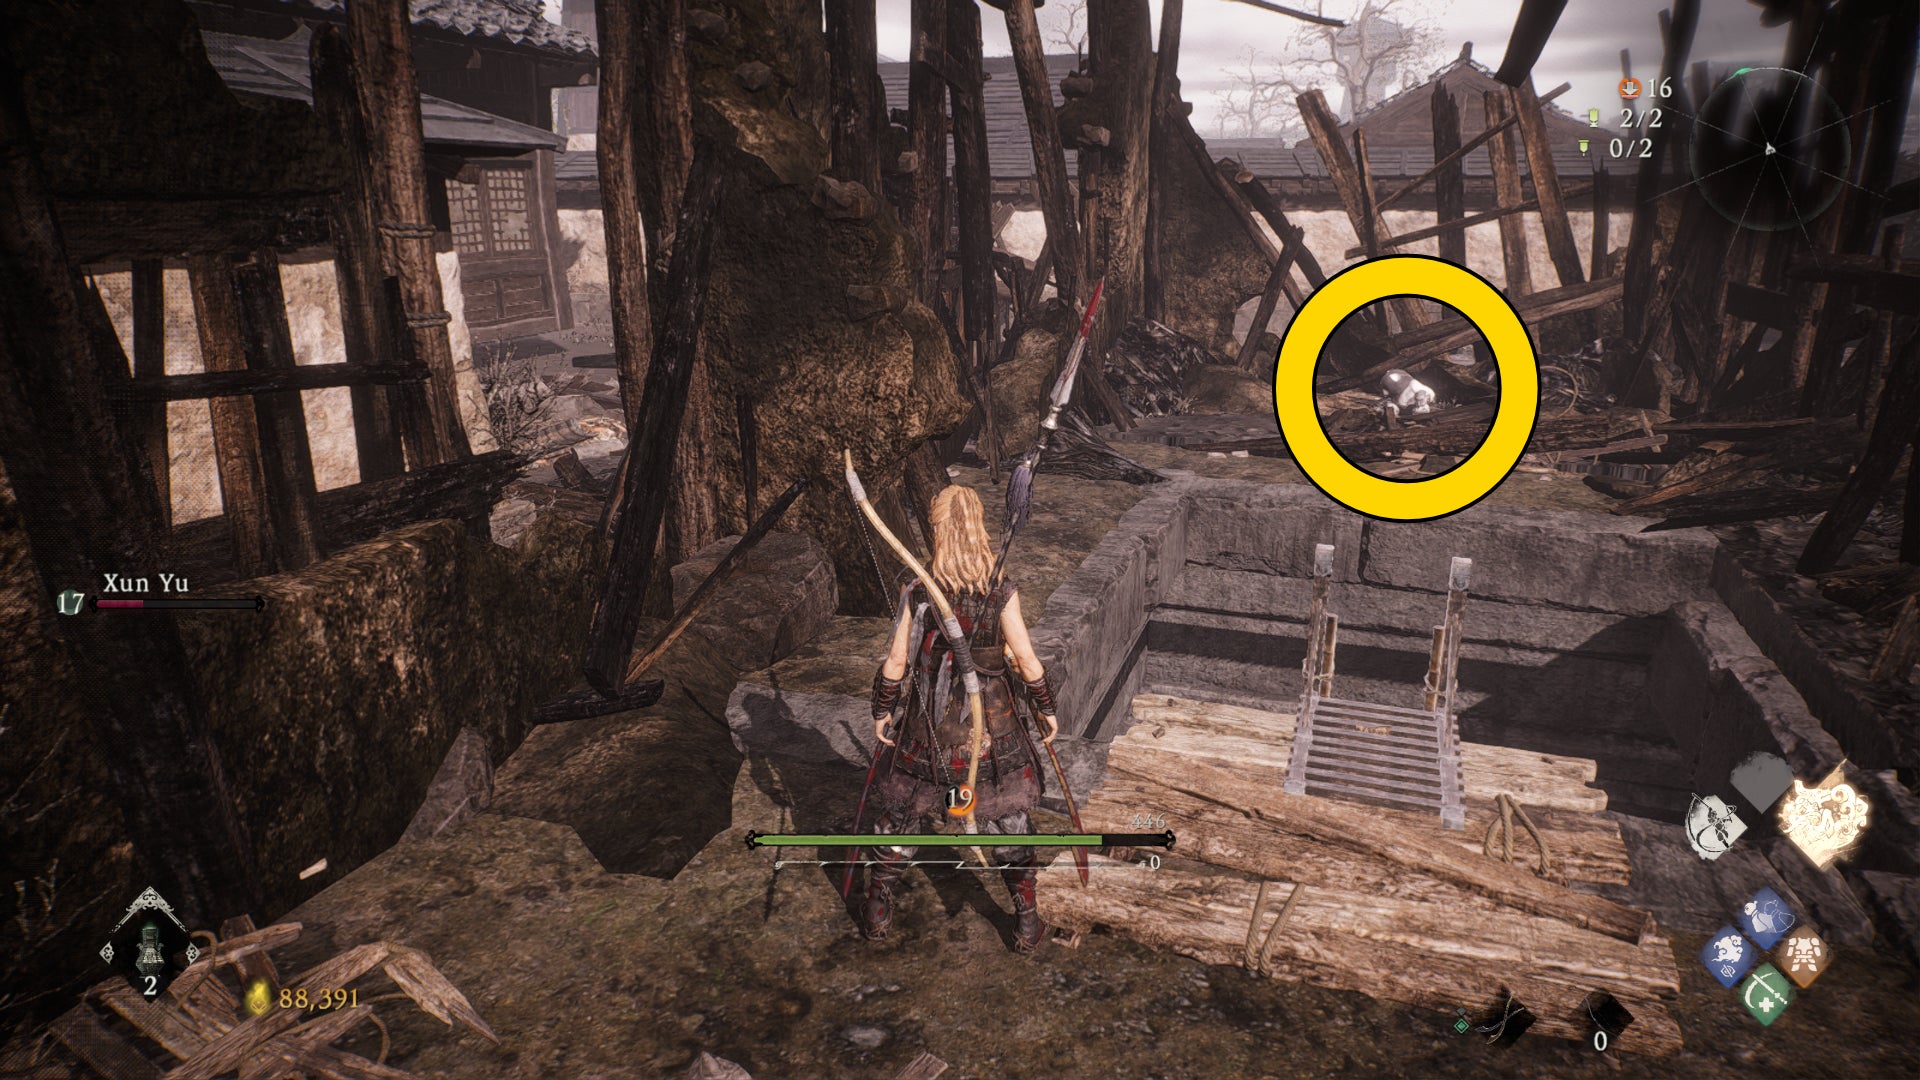 The player in Wo Long stands at the top of a ladder. Behind the ladder is a Shitieshou panda demon.